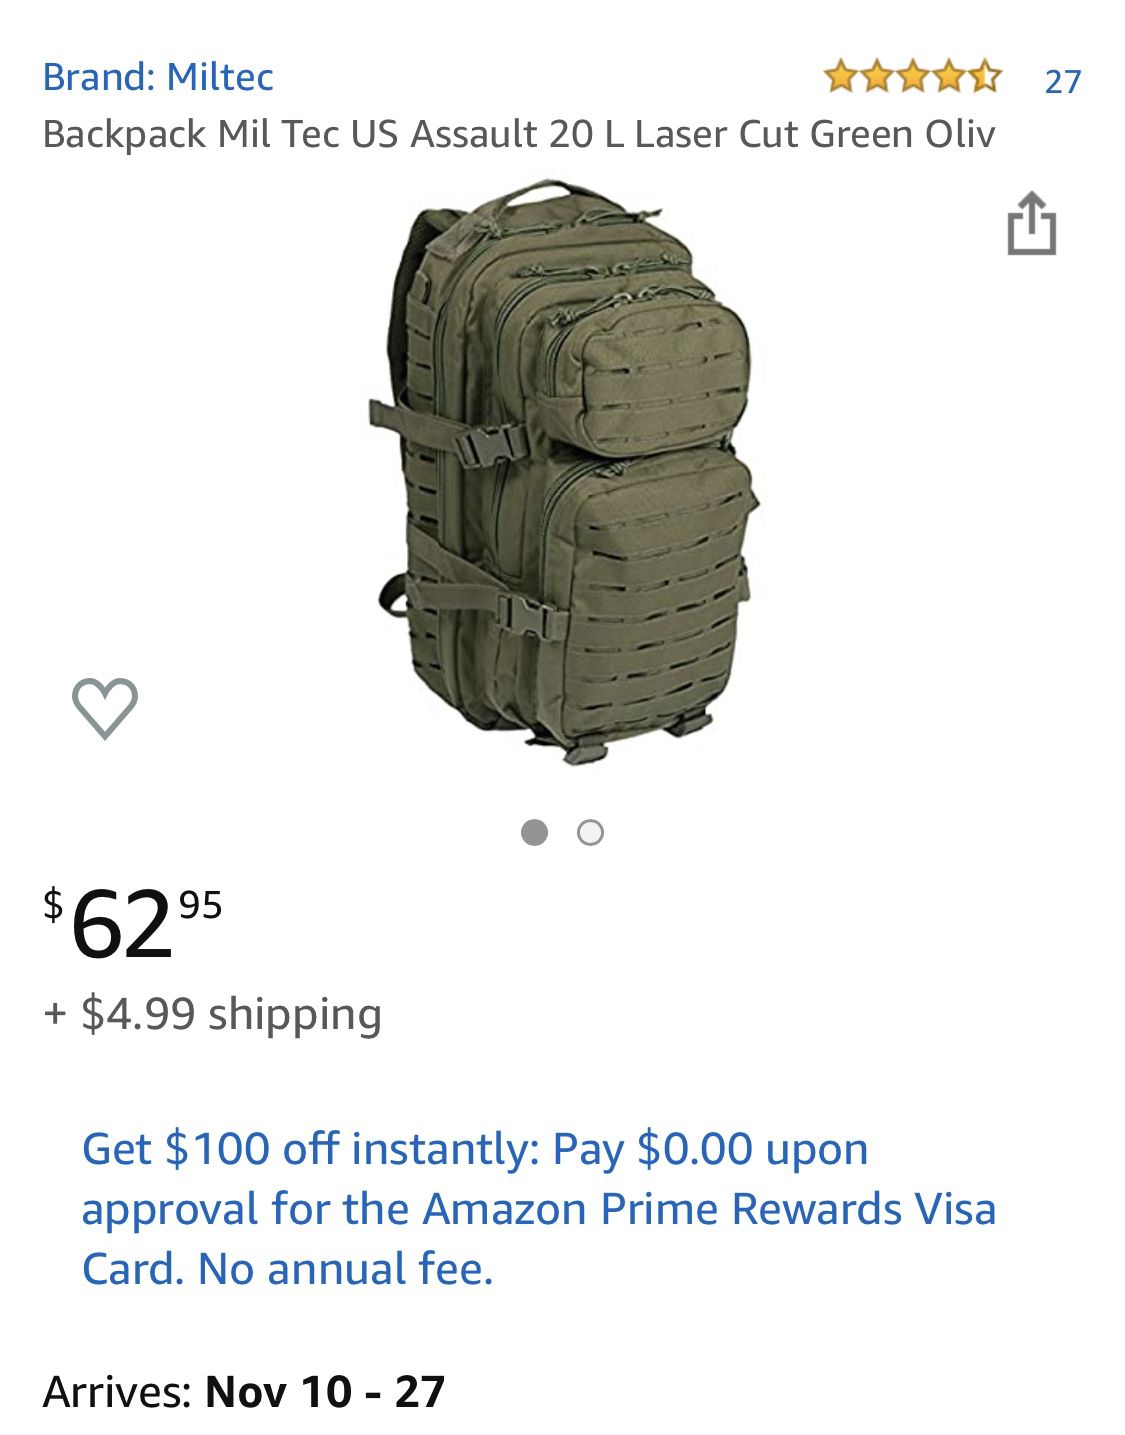 Mil-Tec Laser Cut Backpack (New) Price Firm